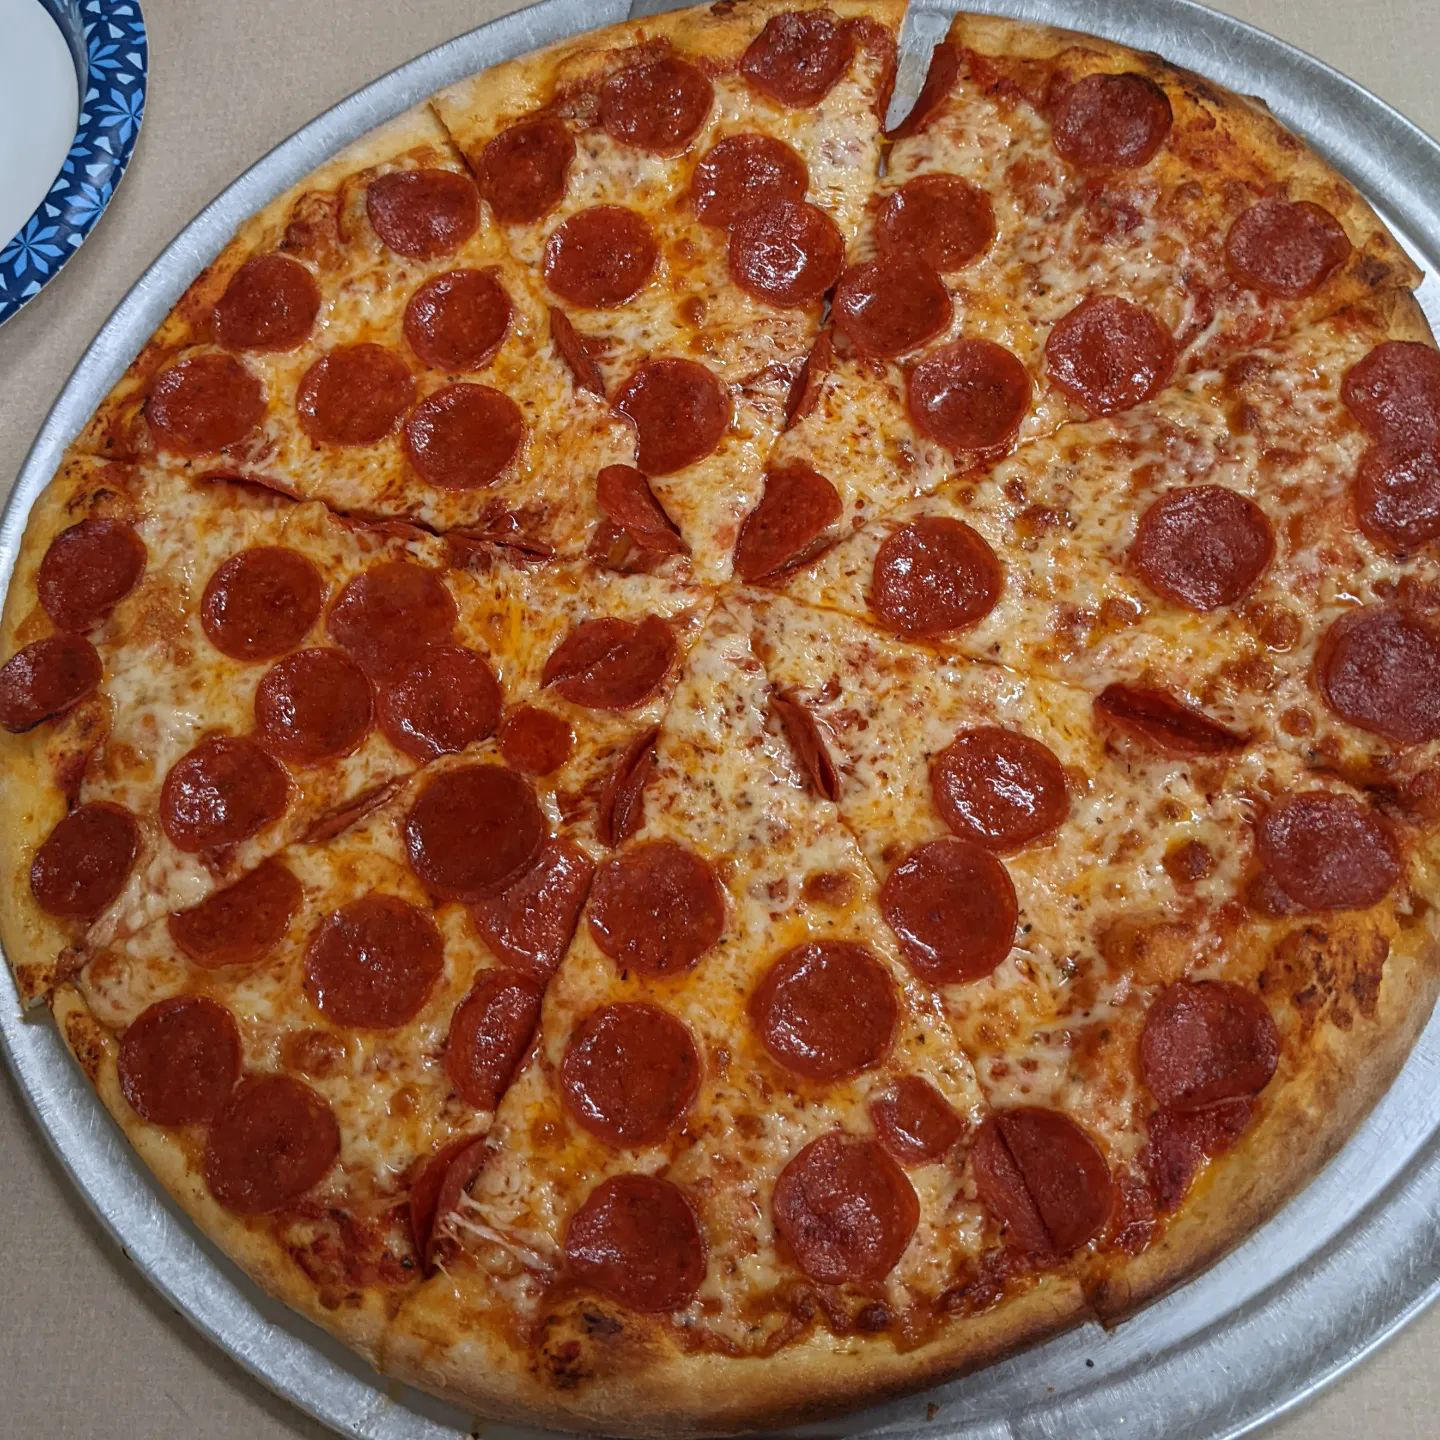 Pizza Nook - Amazing pizza from Giuseppe's in Watervliet, NY